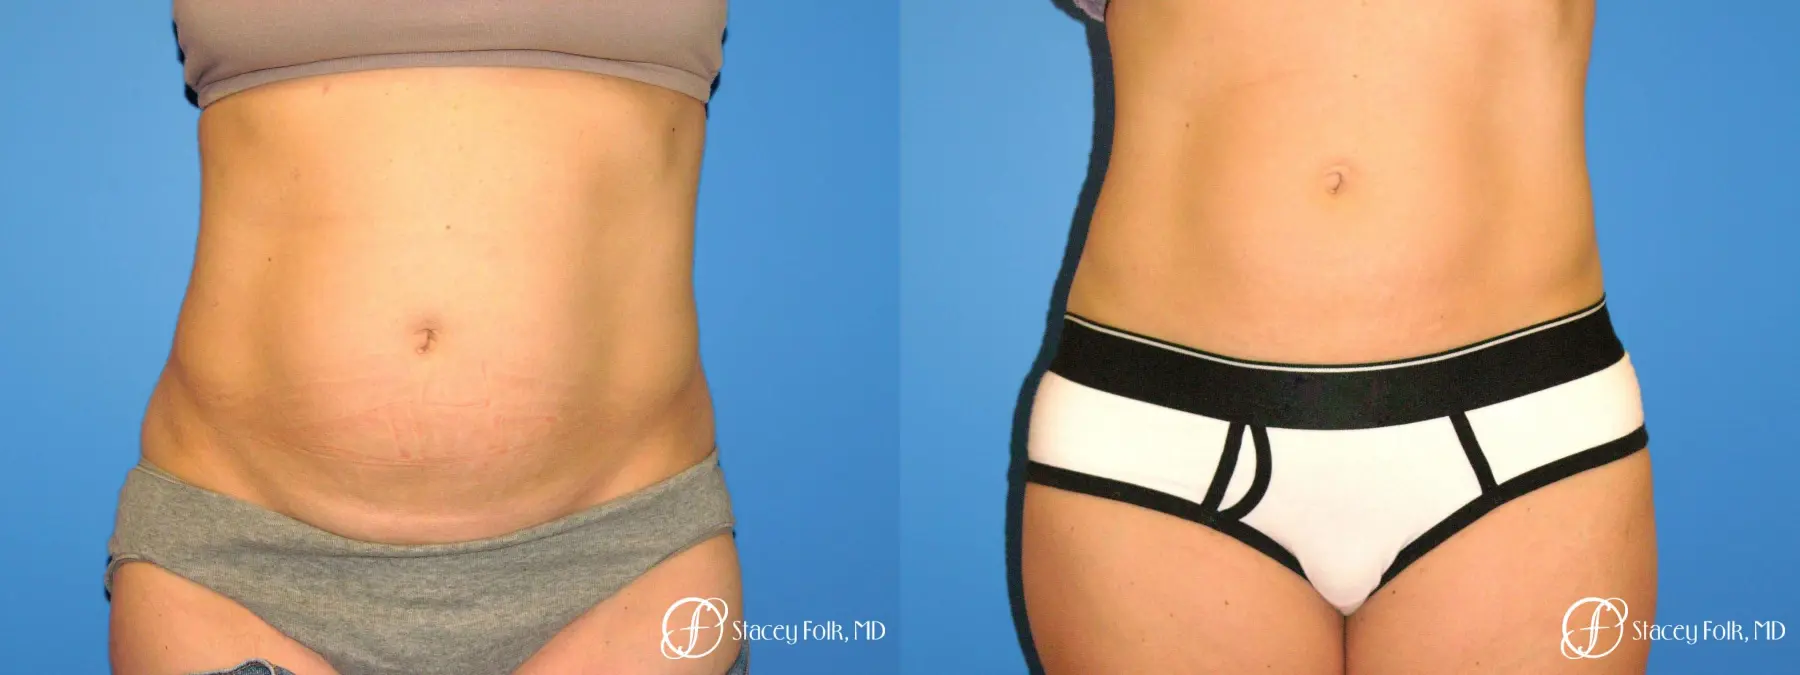 Denver Coolsculpting 8158 - Before and After 1